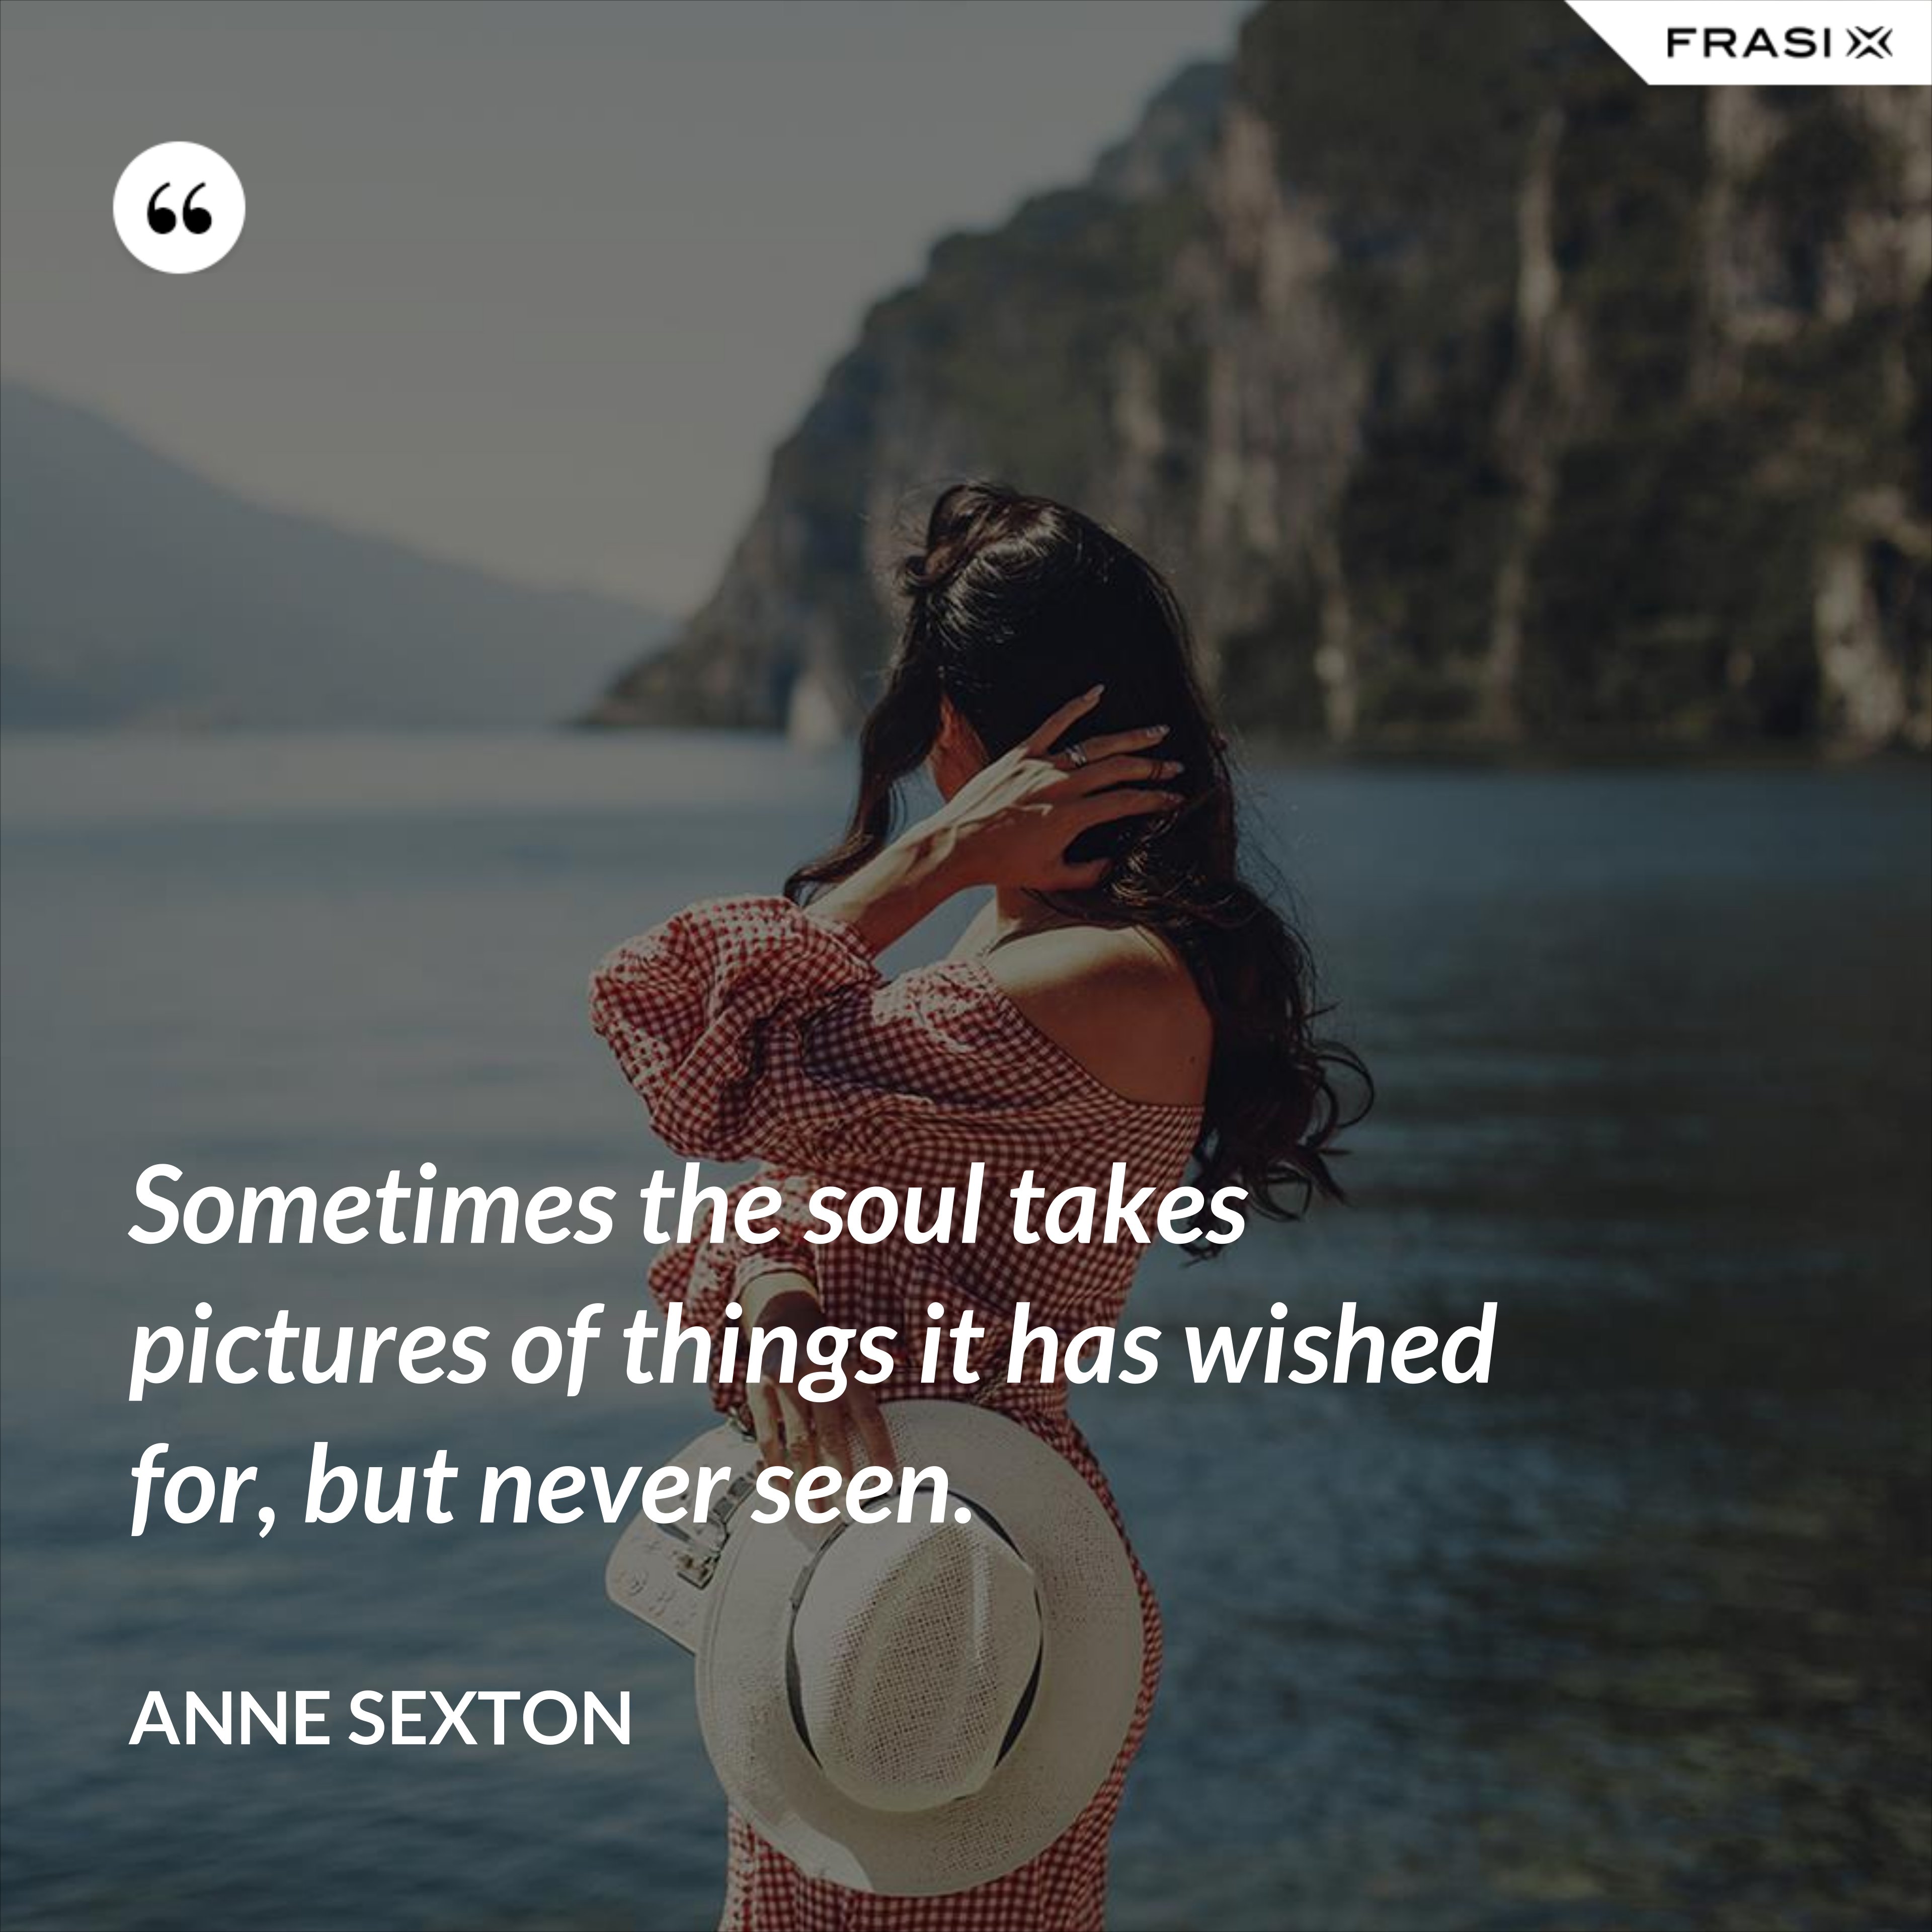 Sometimes the soul takes pictures of things it has wished for, but never seen. - Anne Sexton